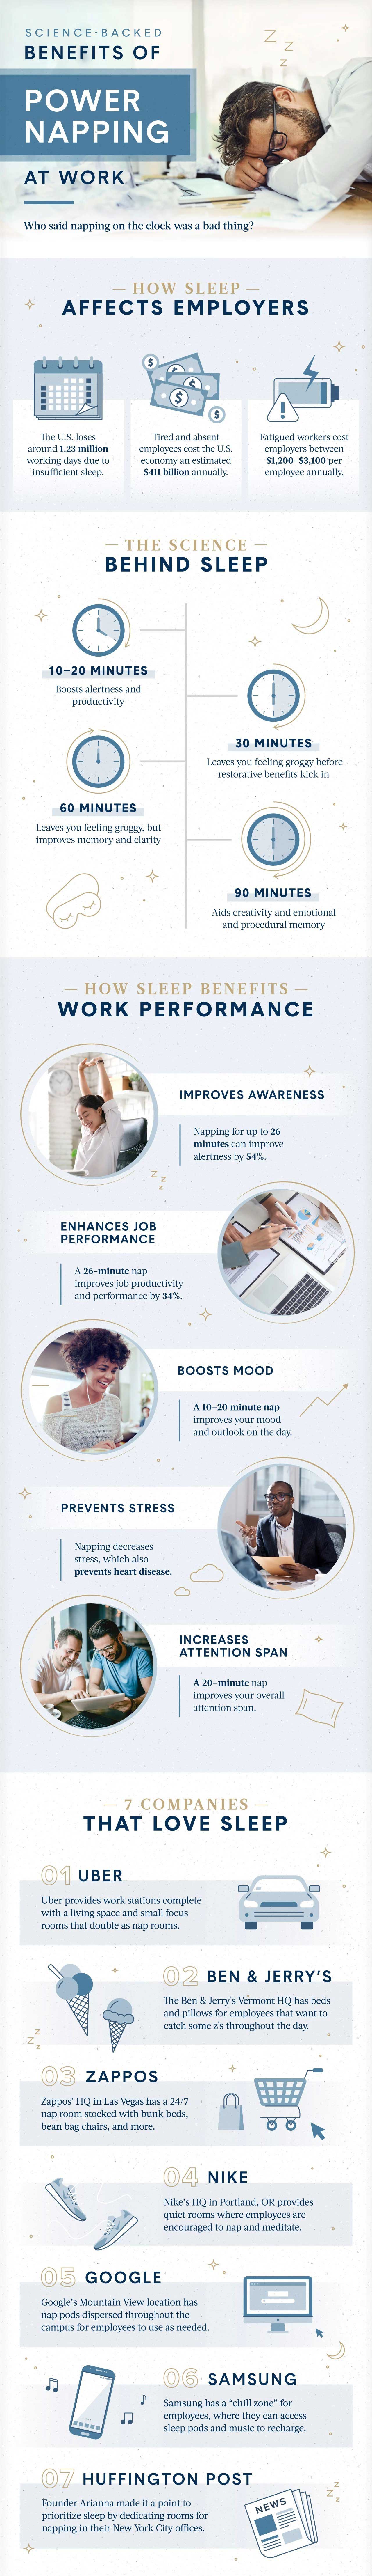 Infographic 5 Benefits of Power Napping at Work